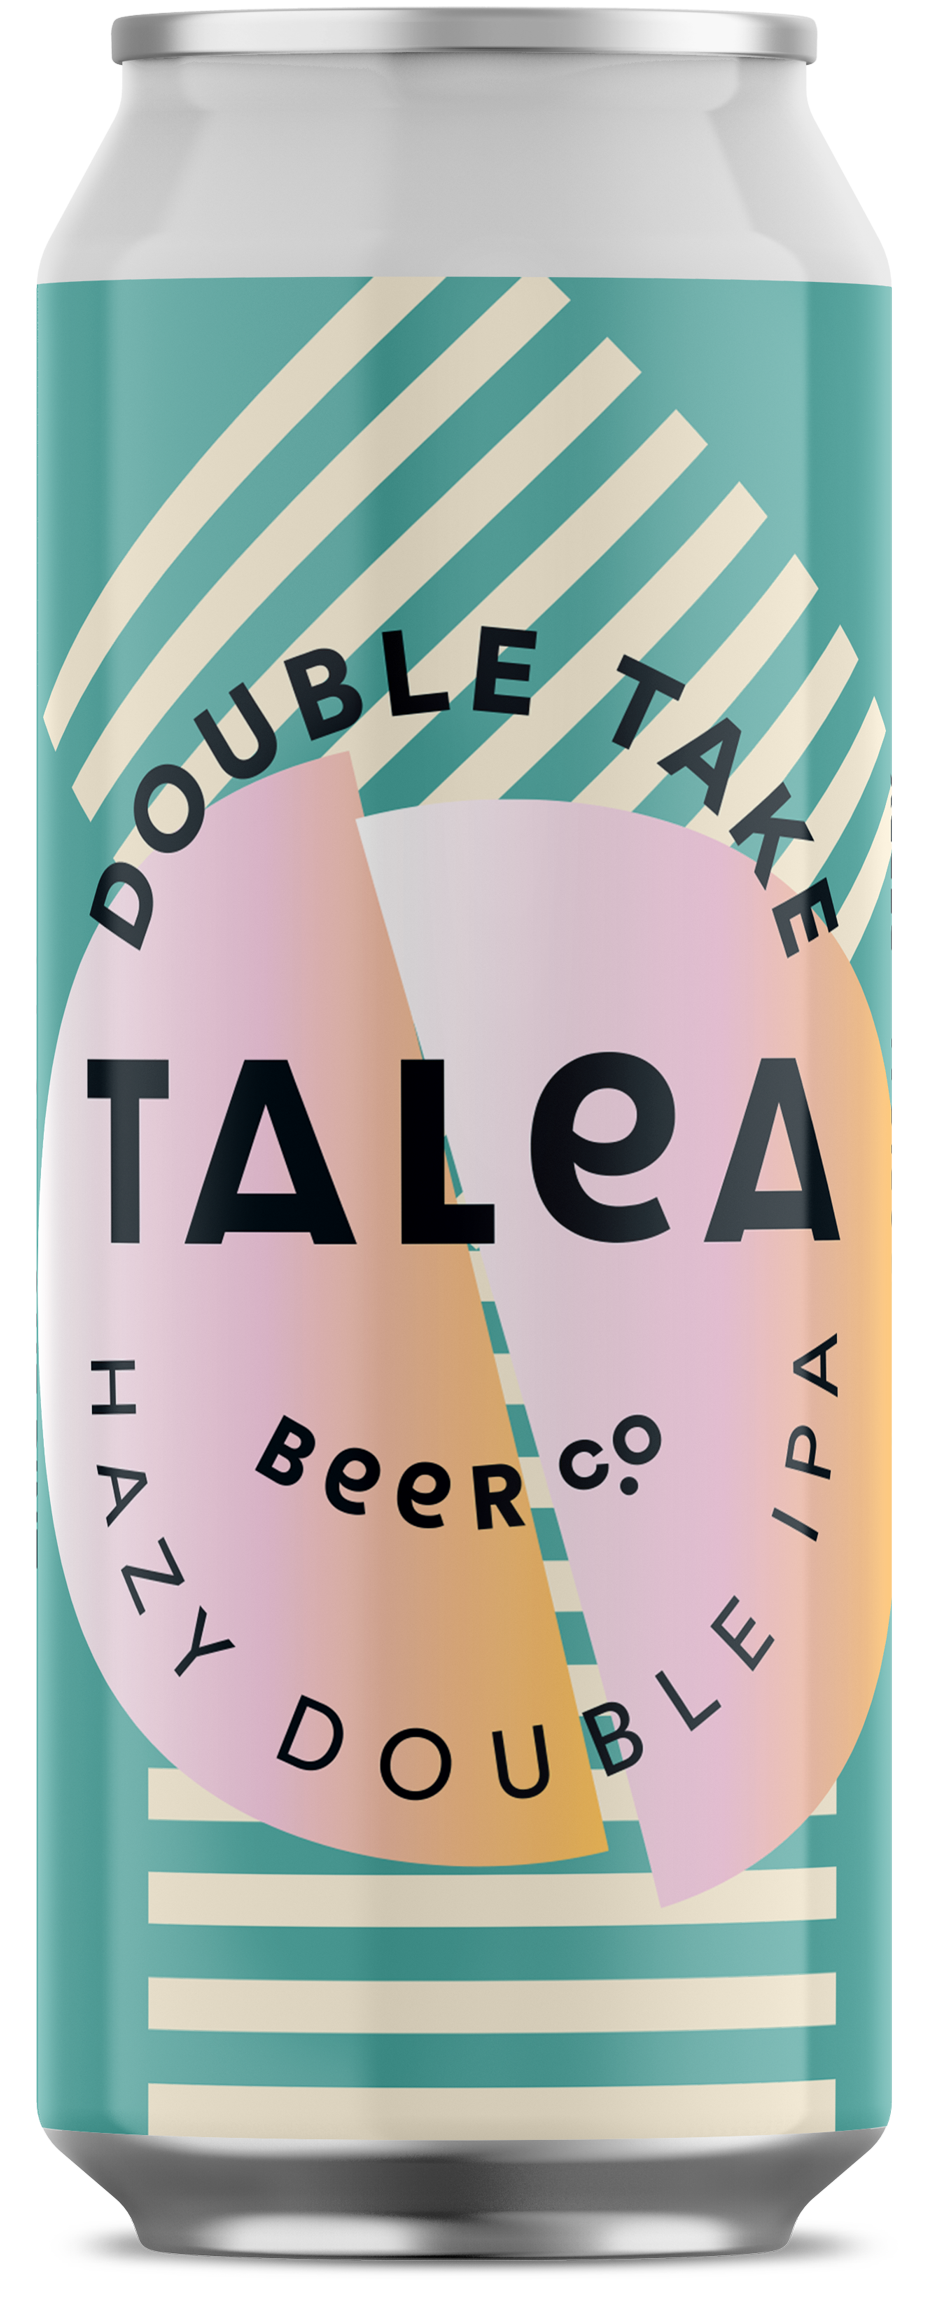 About – TALEA Beer Co.